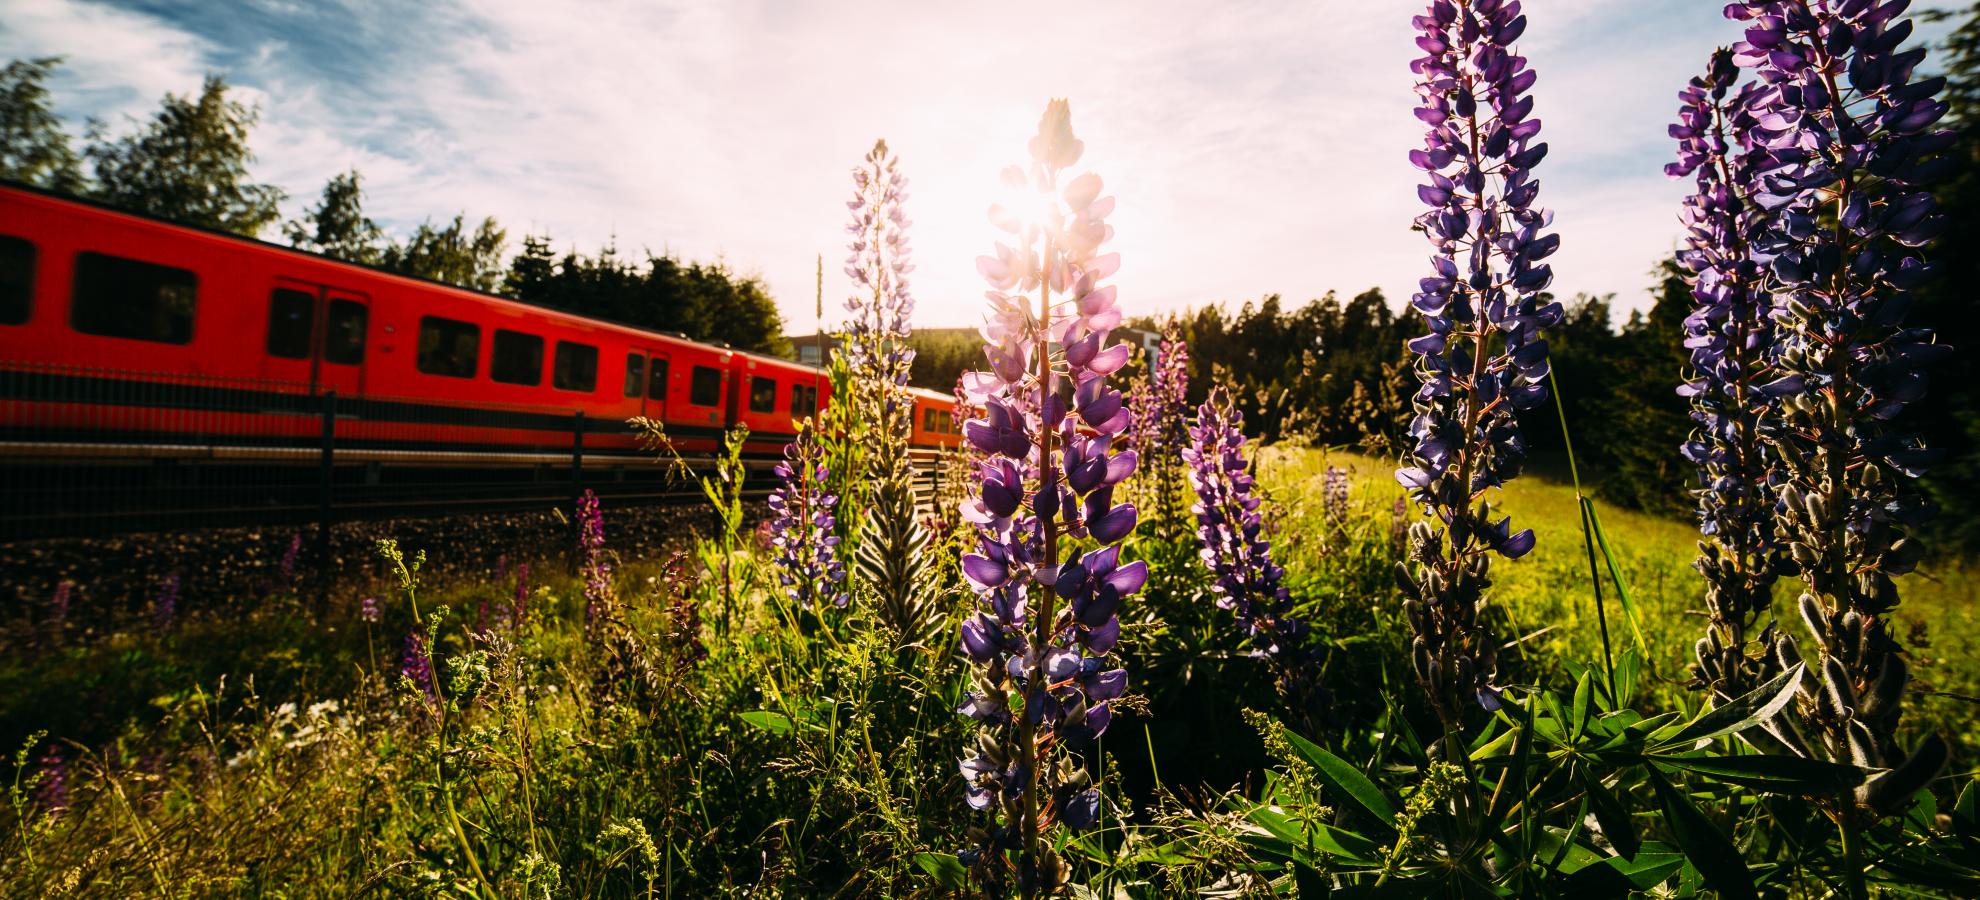 Half a dozen Lupins stand on a grassy bank in the foreground, while a metro train passes by on the left of the picture under a sunny, blue sky.